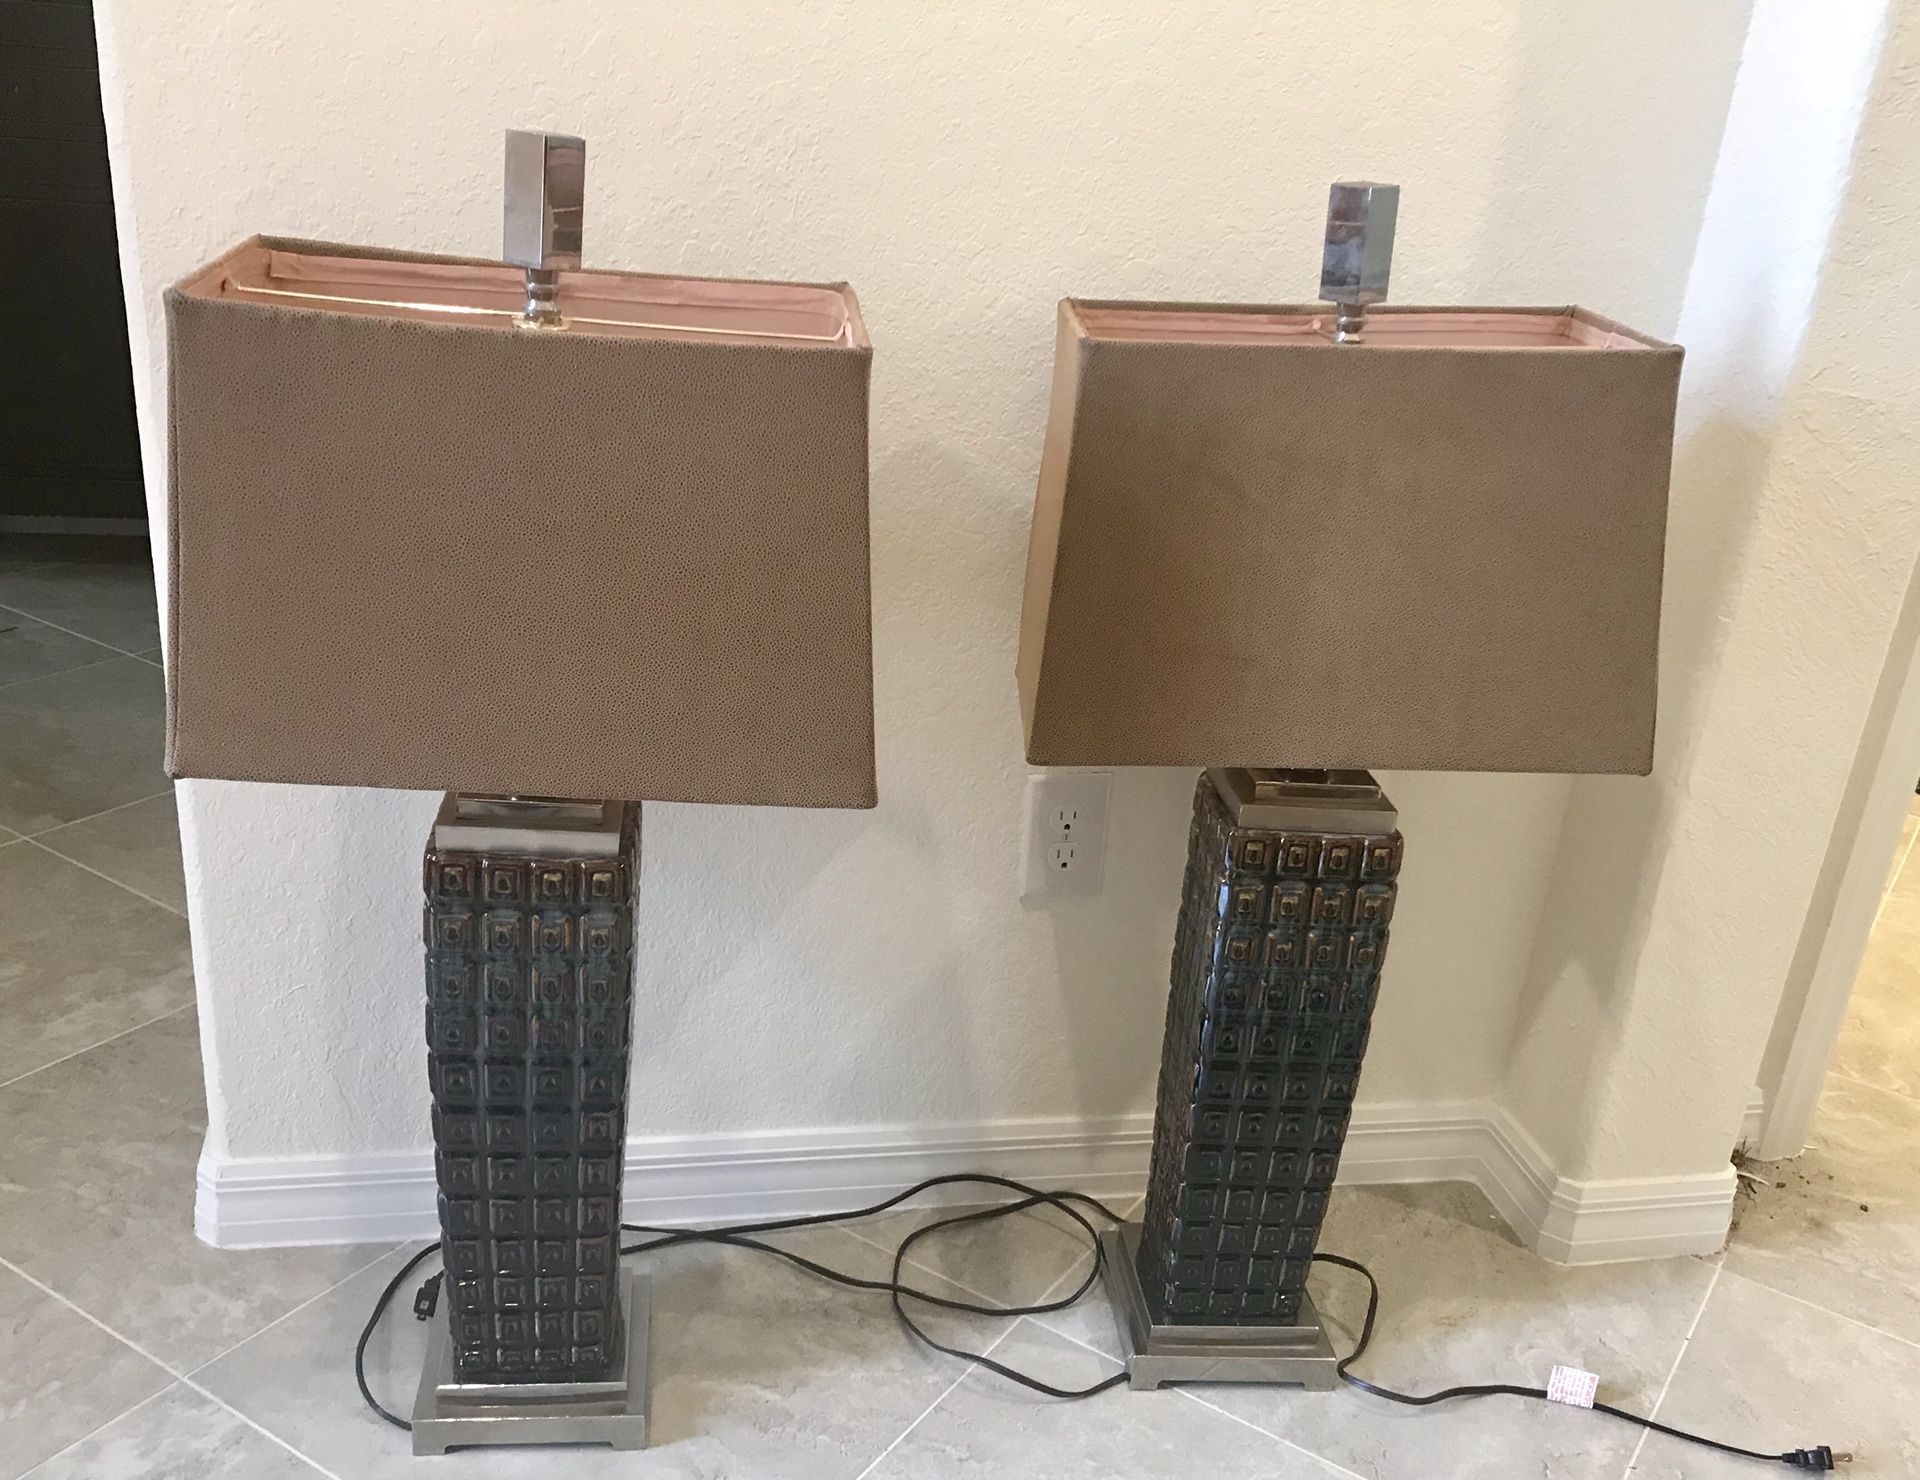 Two Ceramic Table Lamps